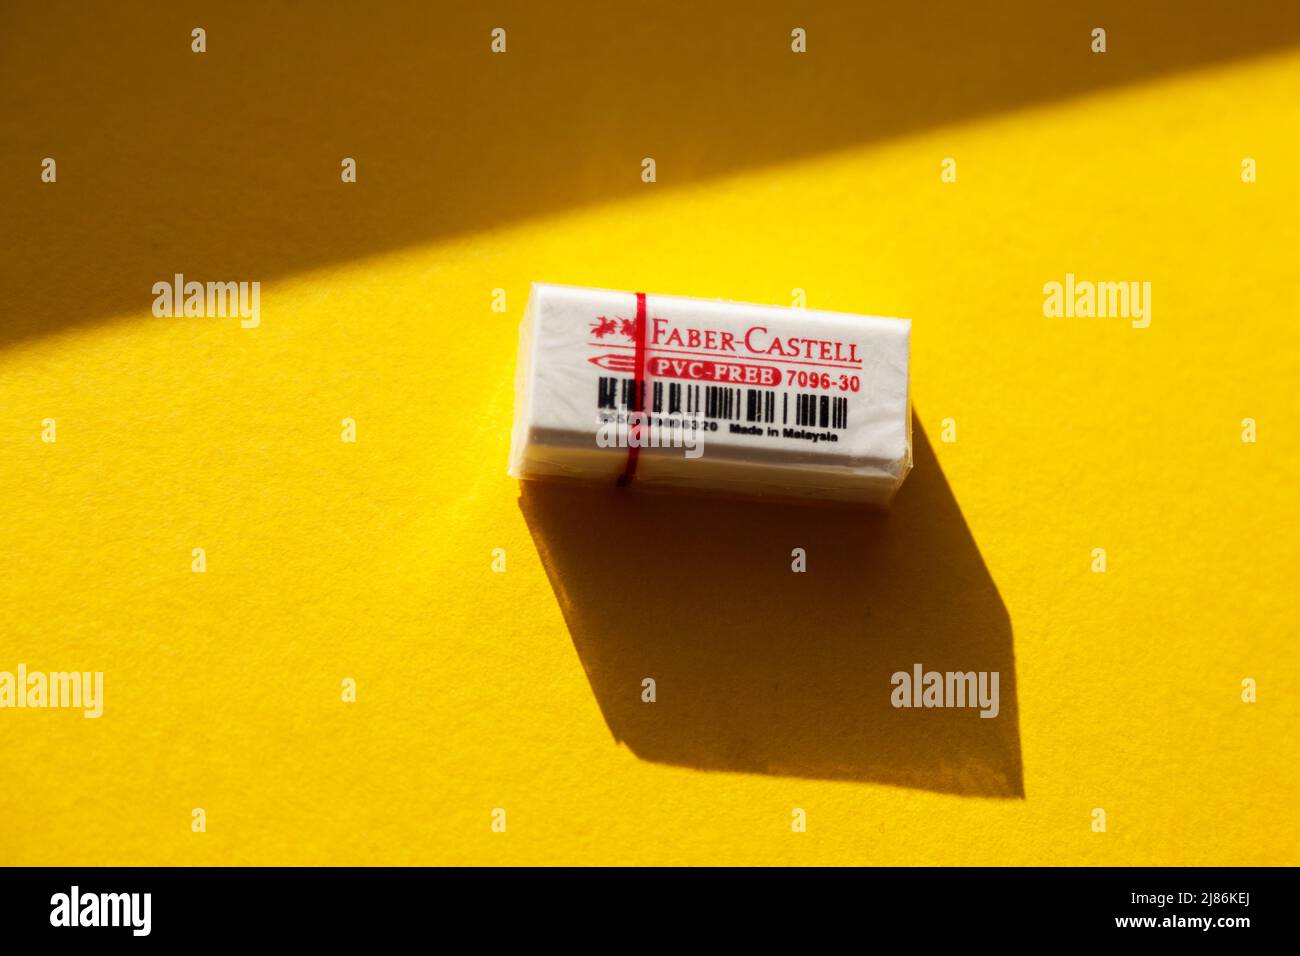 Umea, Norrland Sweden - October 9, 2019: a white eraser on a yellow background Stock Photo